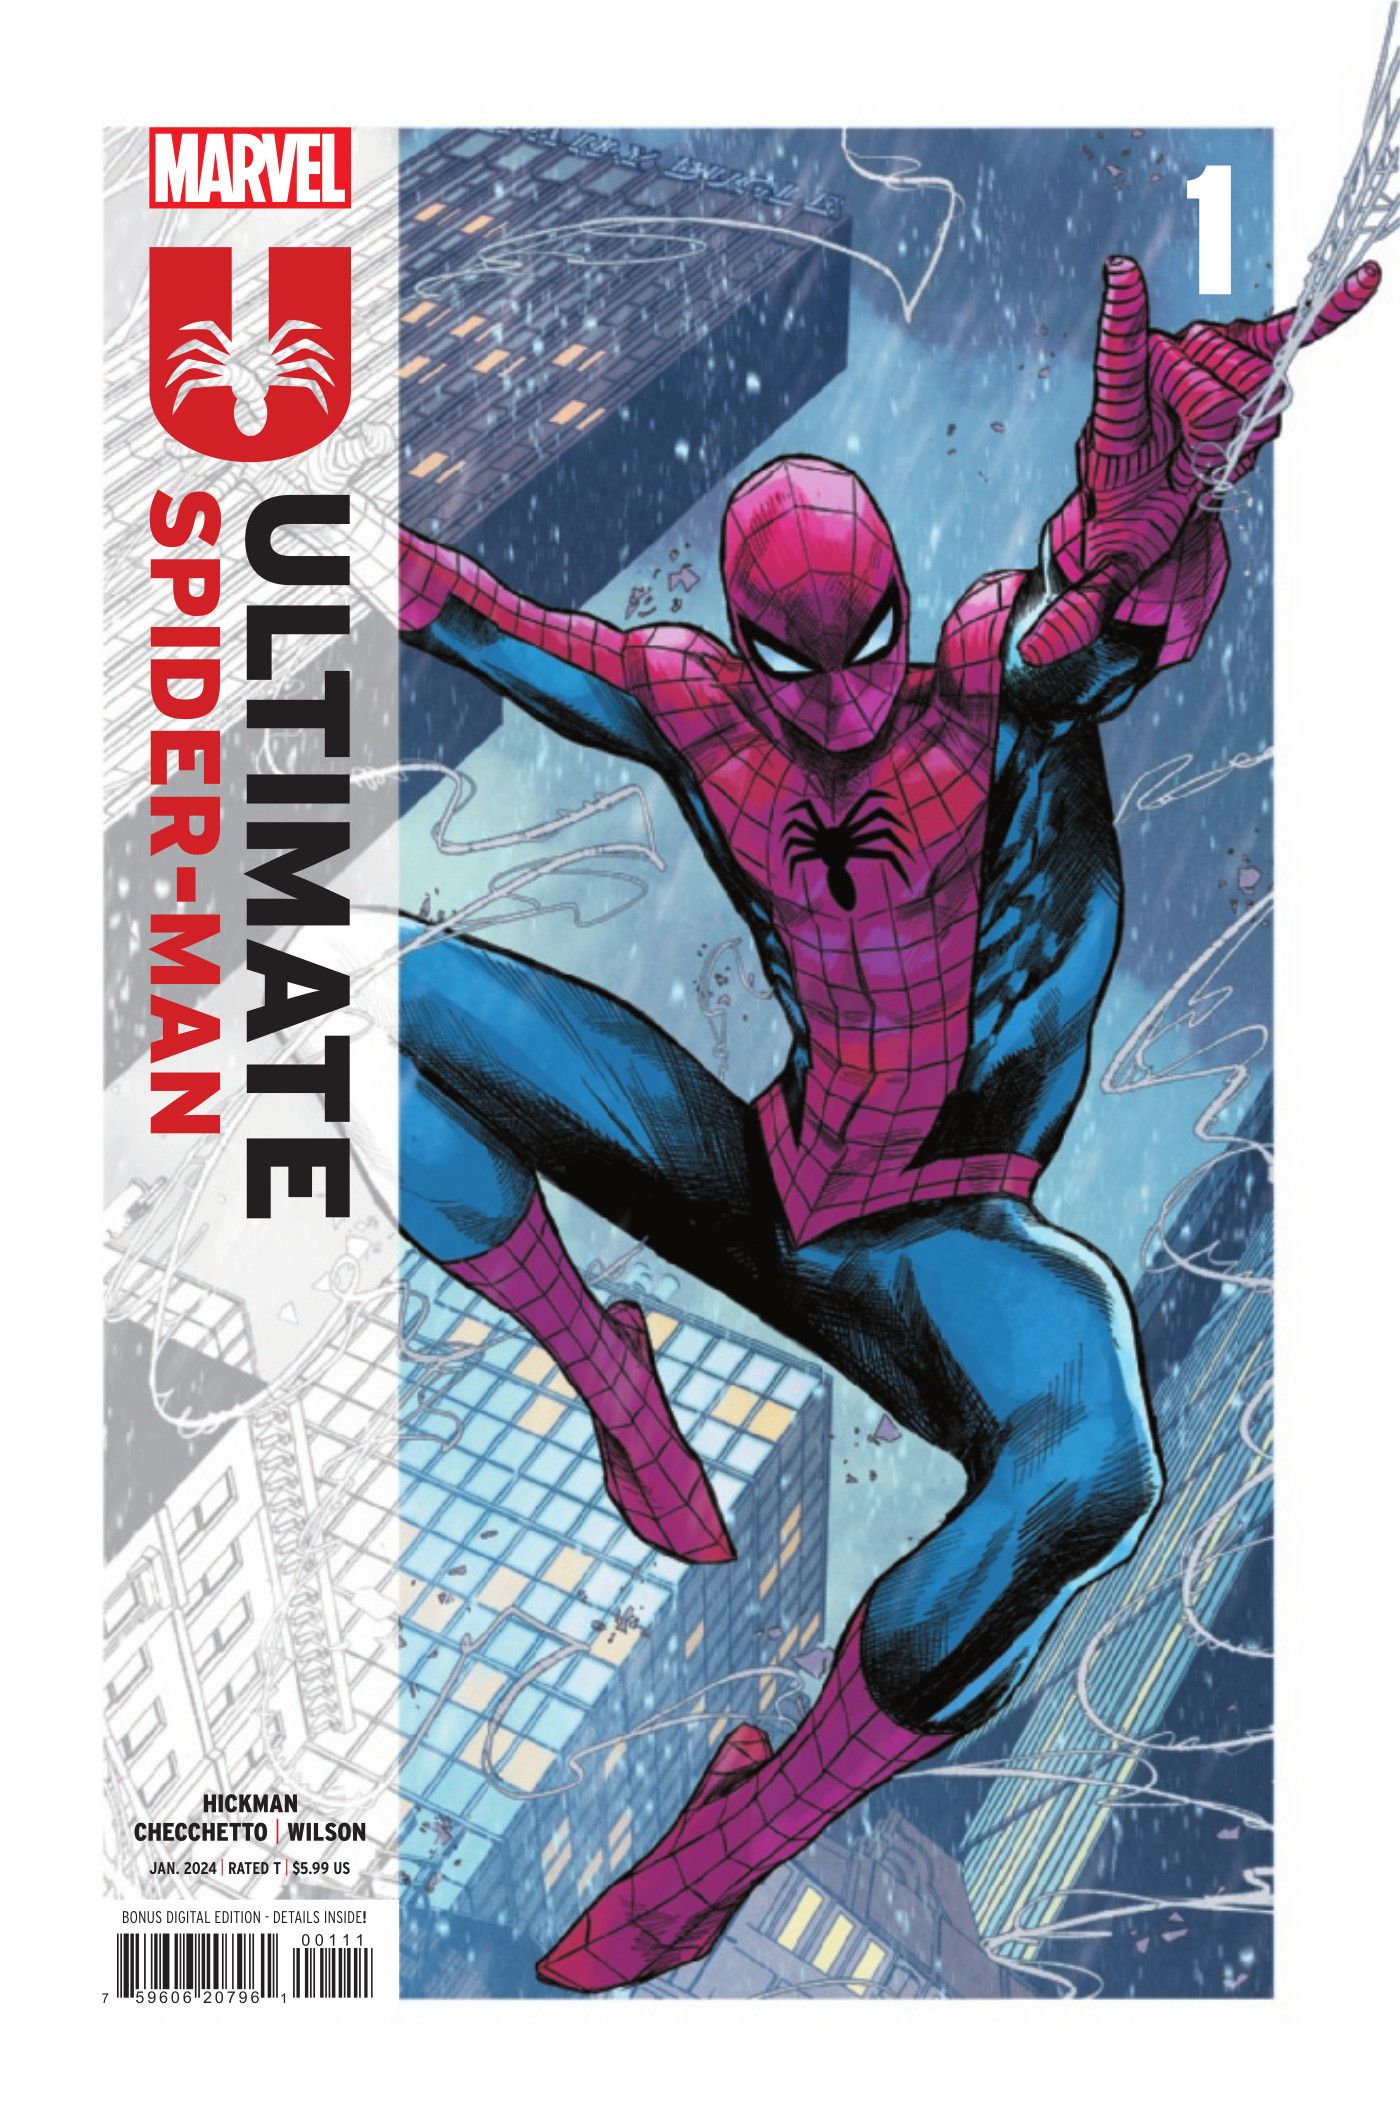 Spider-Man slings his web over the city on the Ultimate Spider-Man #1 Cover by Marco Checcetto and Matthew Wilson